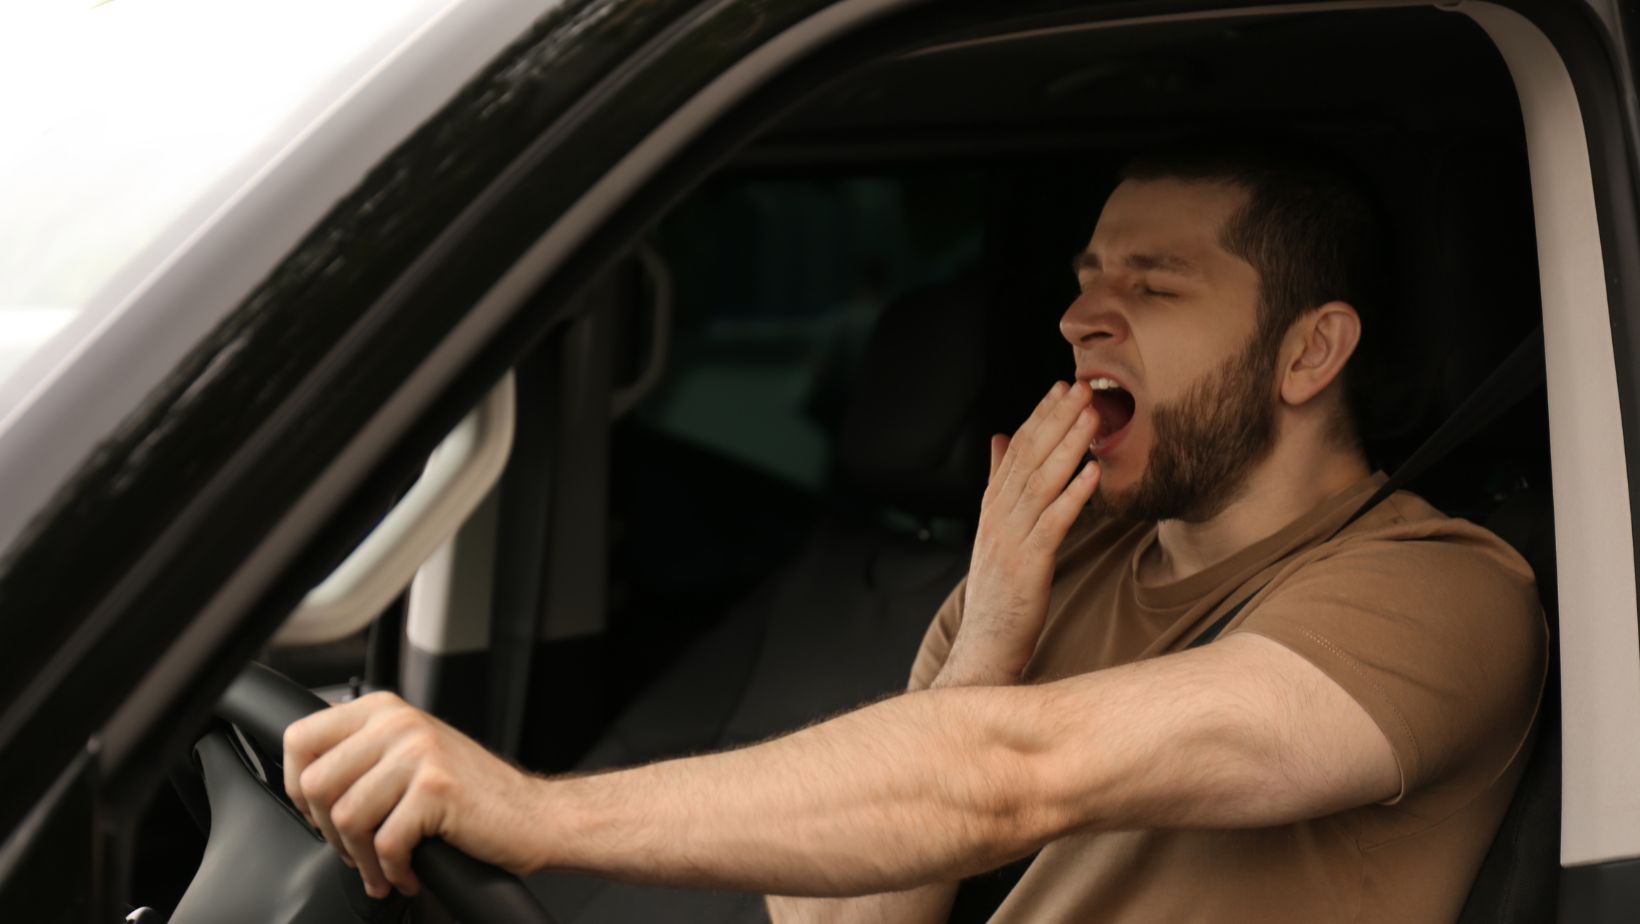 which of these tips is not a good way to combat drowsy driving?